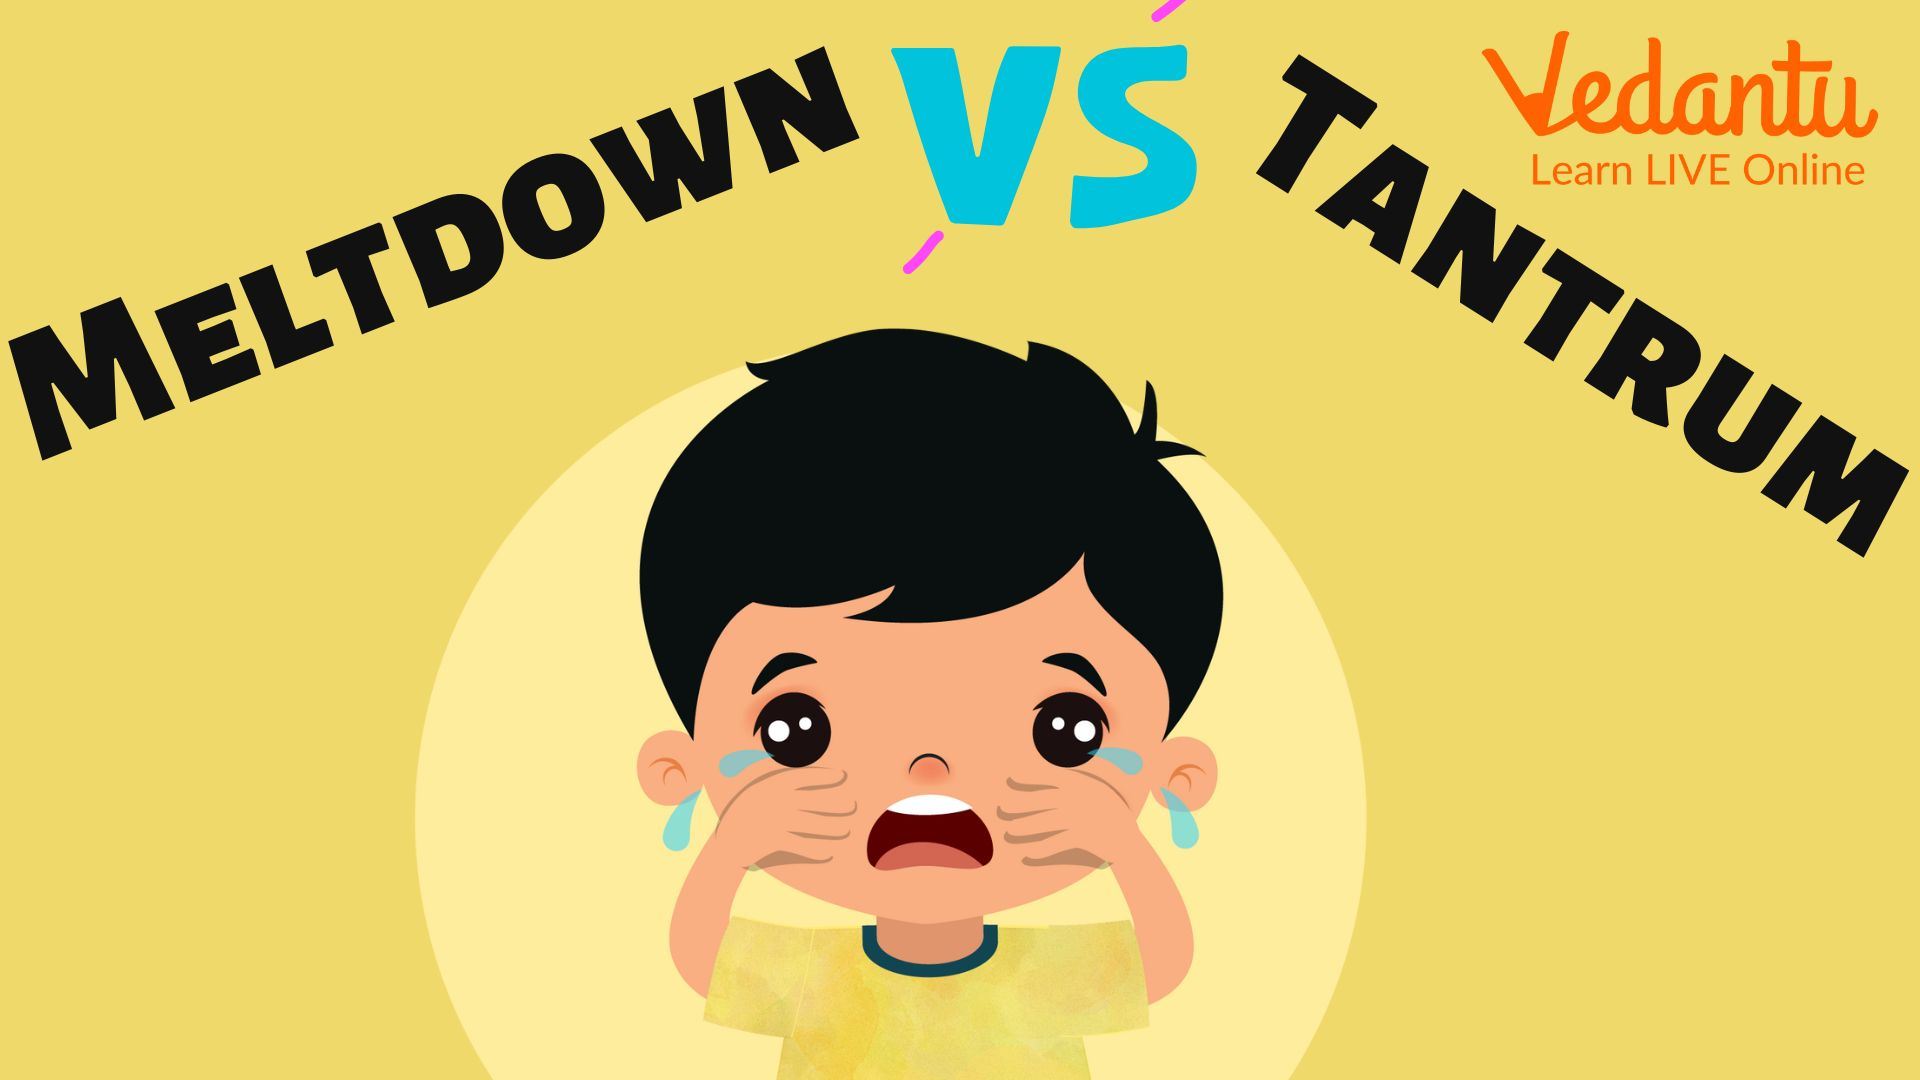 Meltdown and Tantrum differences